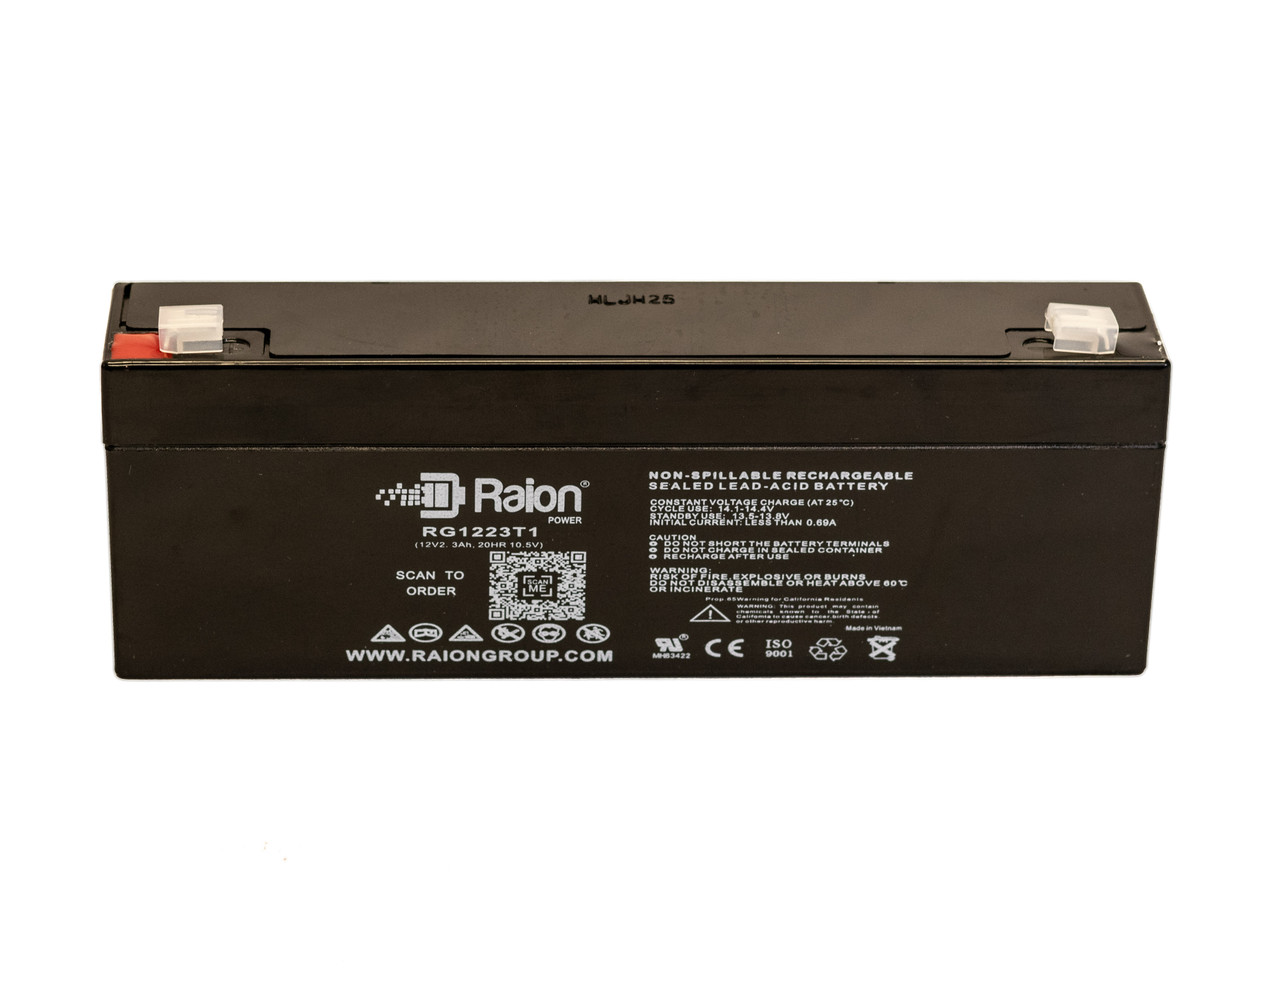 Raion Power 12V 2.3Ah SLA Battery With T1 Terminals For Baxter Healthcare AS 5D Auto Syringe